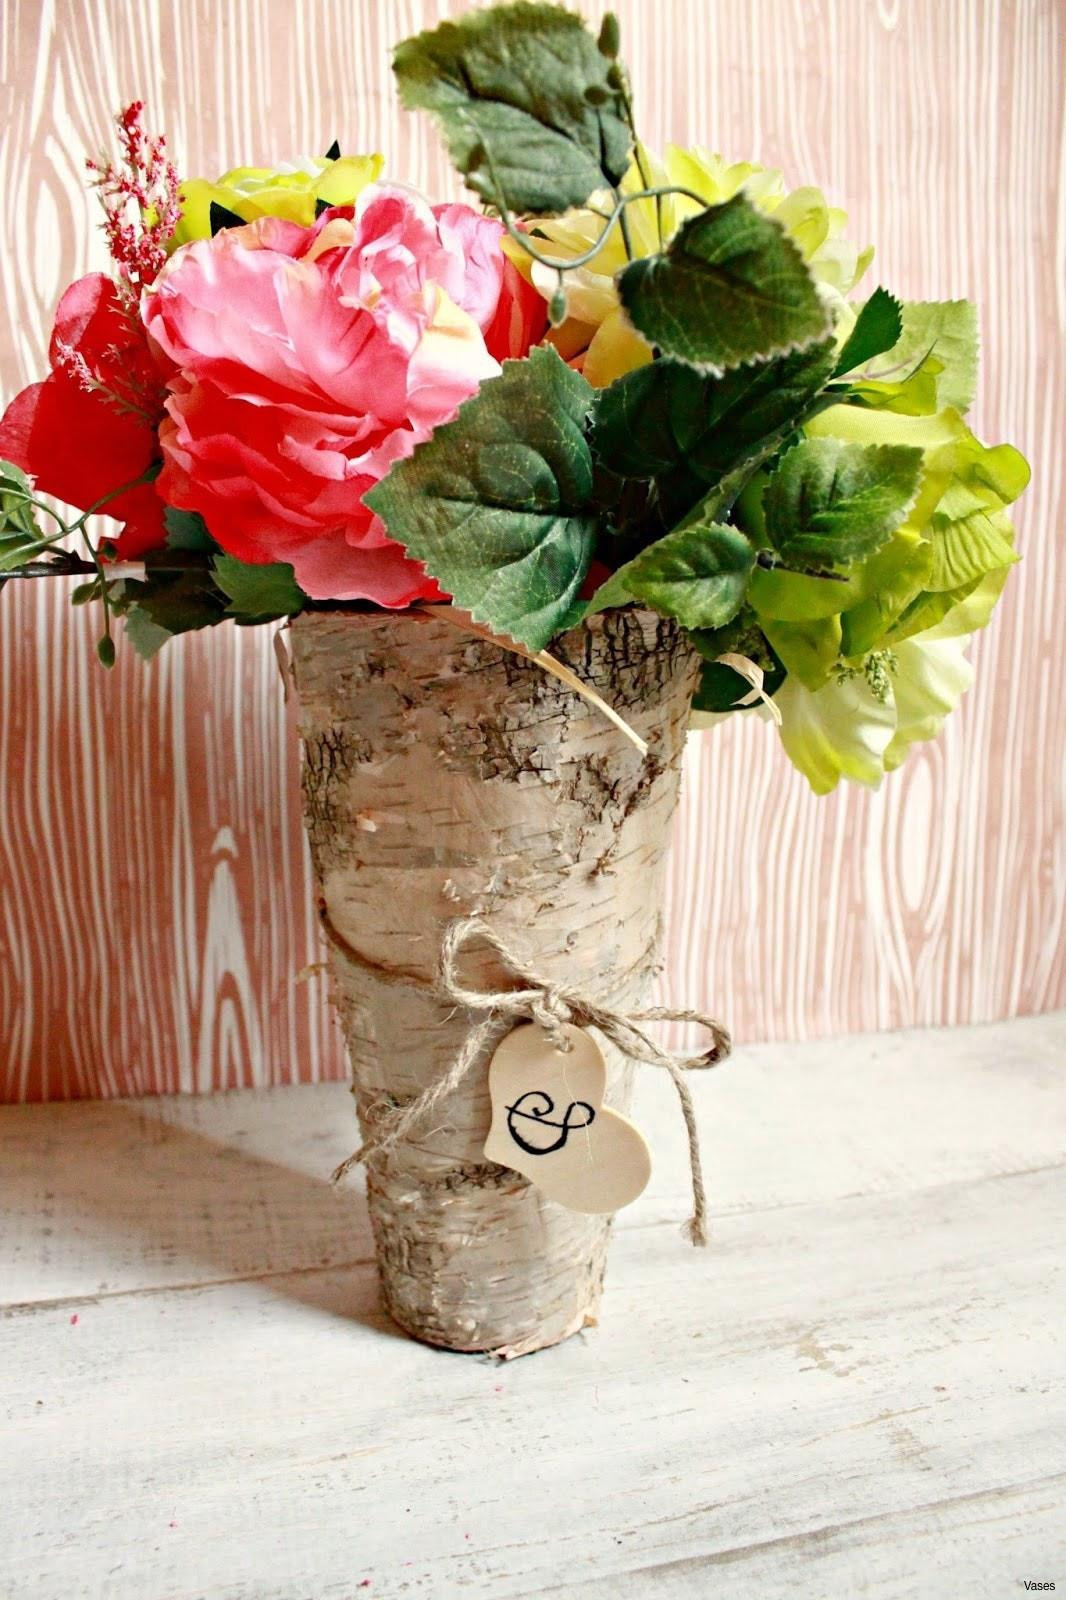 22 Recommended Glass Bottle Vase 2024 free download glass bottle vase of diy wedding ideas on a budget fresh flowers and decorations for in diy wedding ideas on a budget fresh flowers and decorations for weddings h vases diy wood